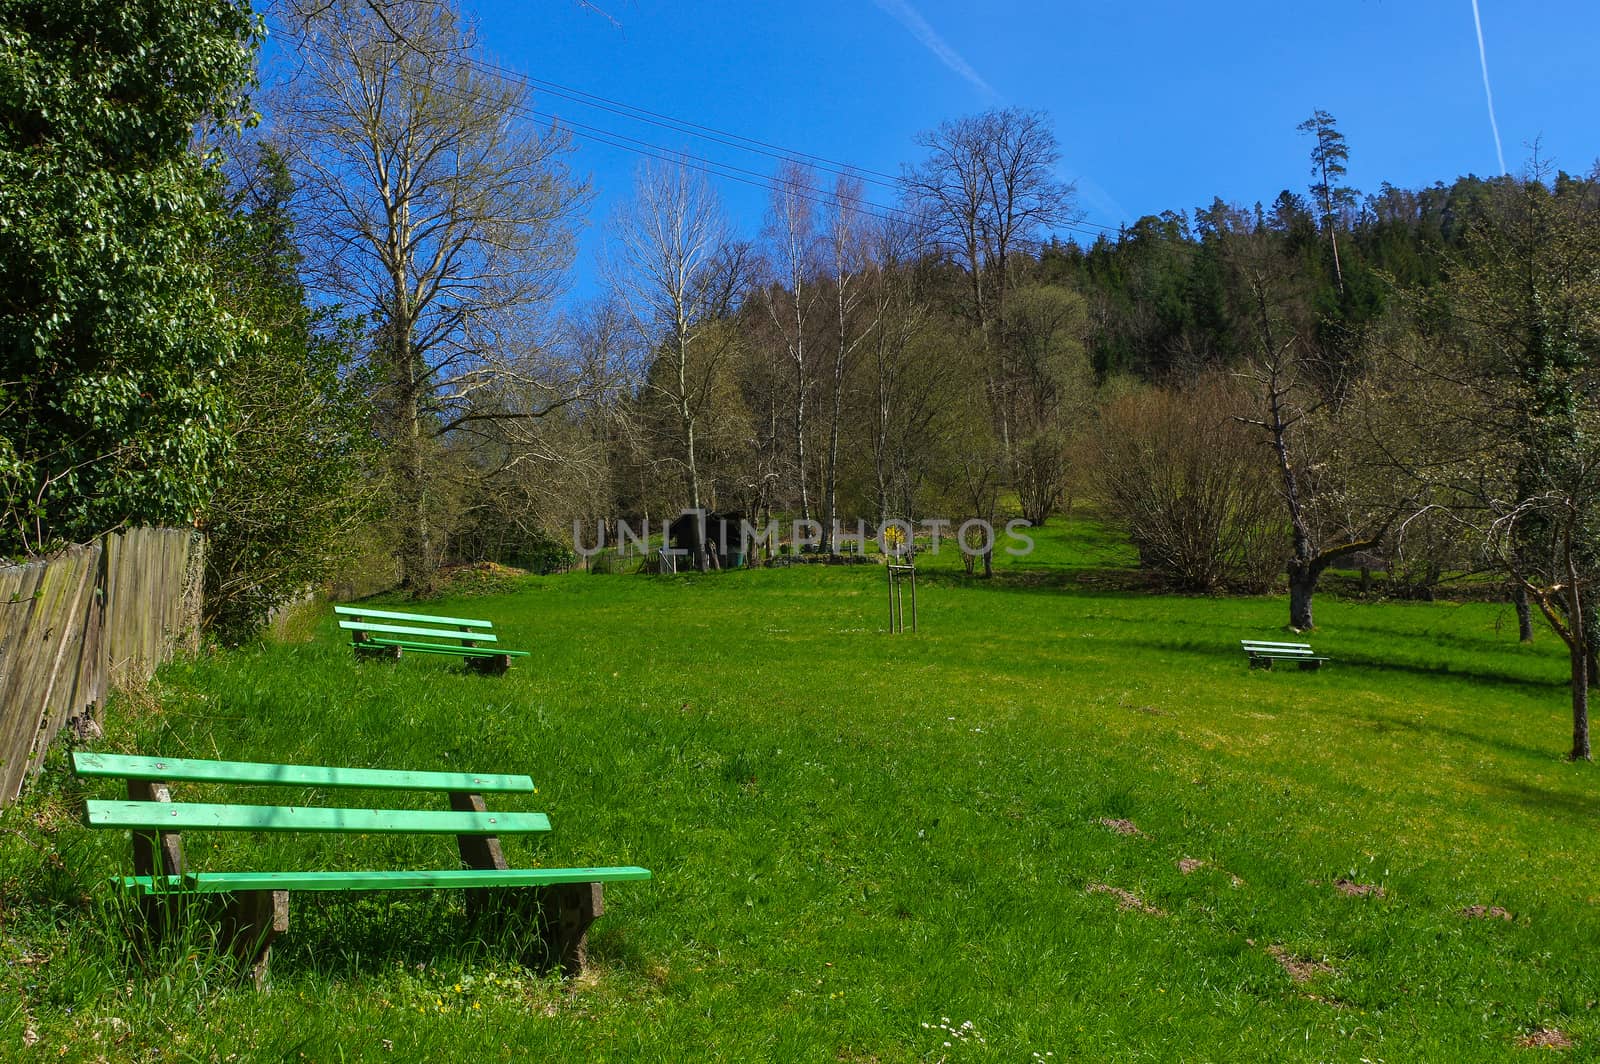 a wooden green bench under trees in the park